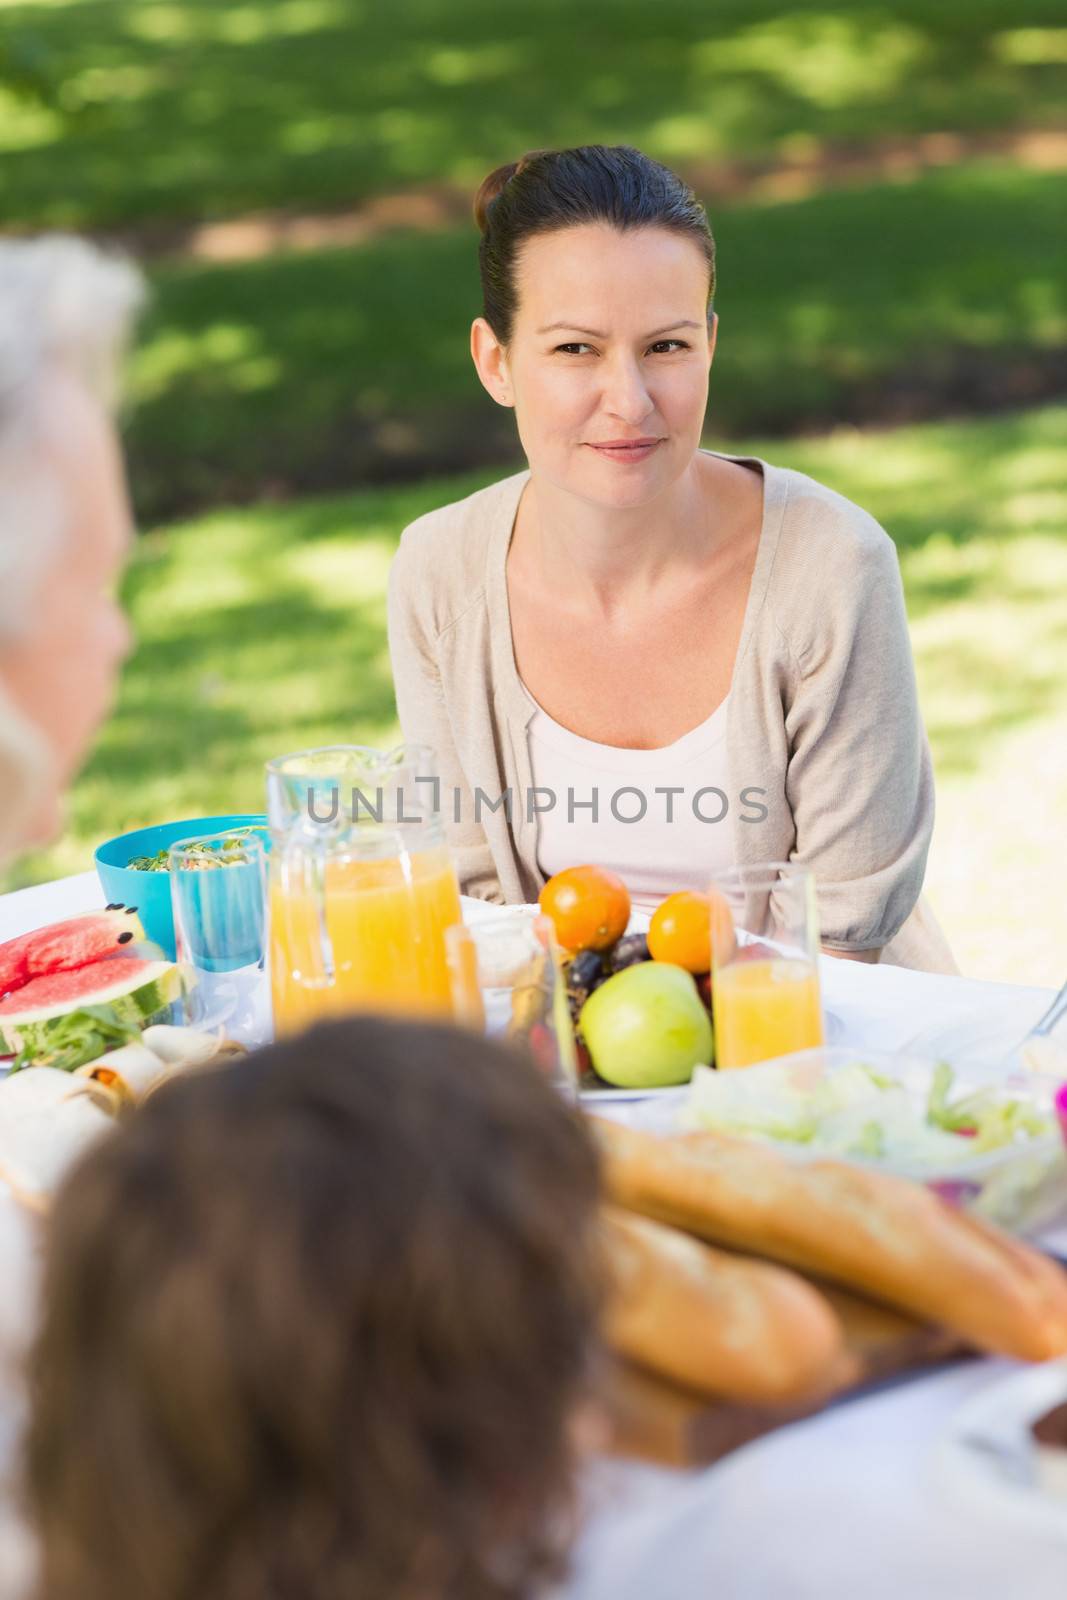 Smiling young woman sitting with family at outdoor dining table